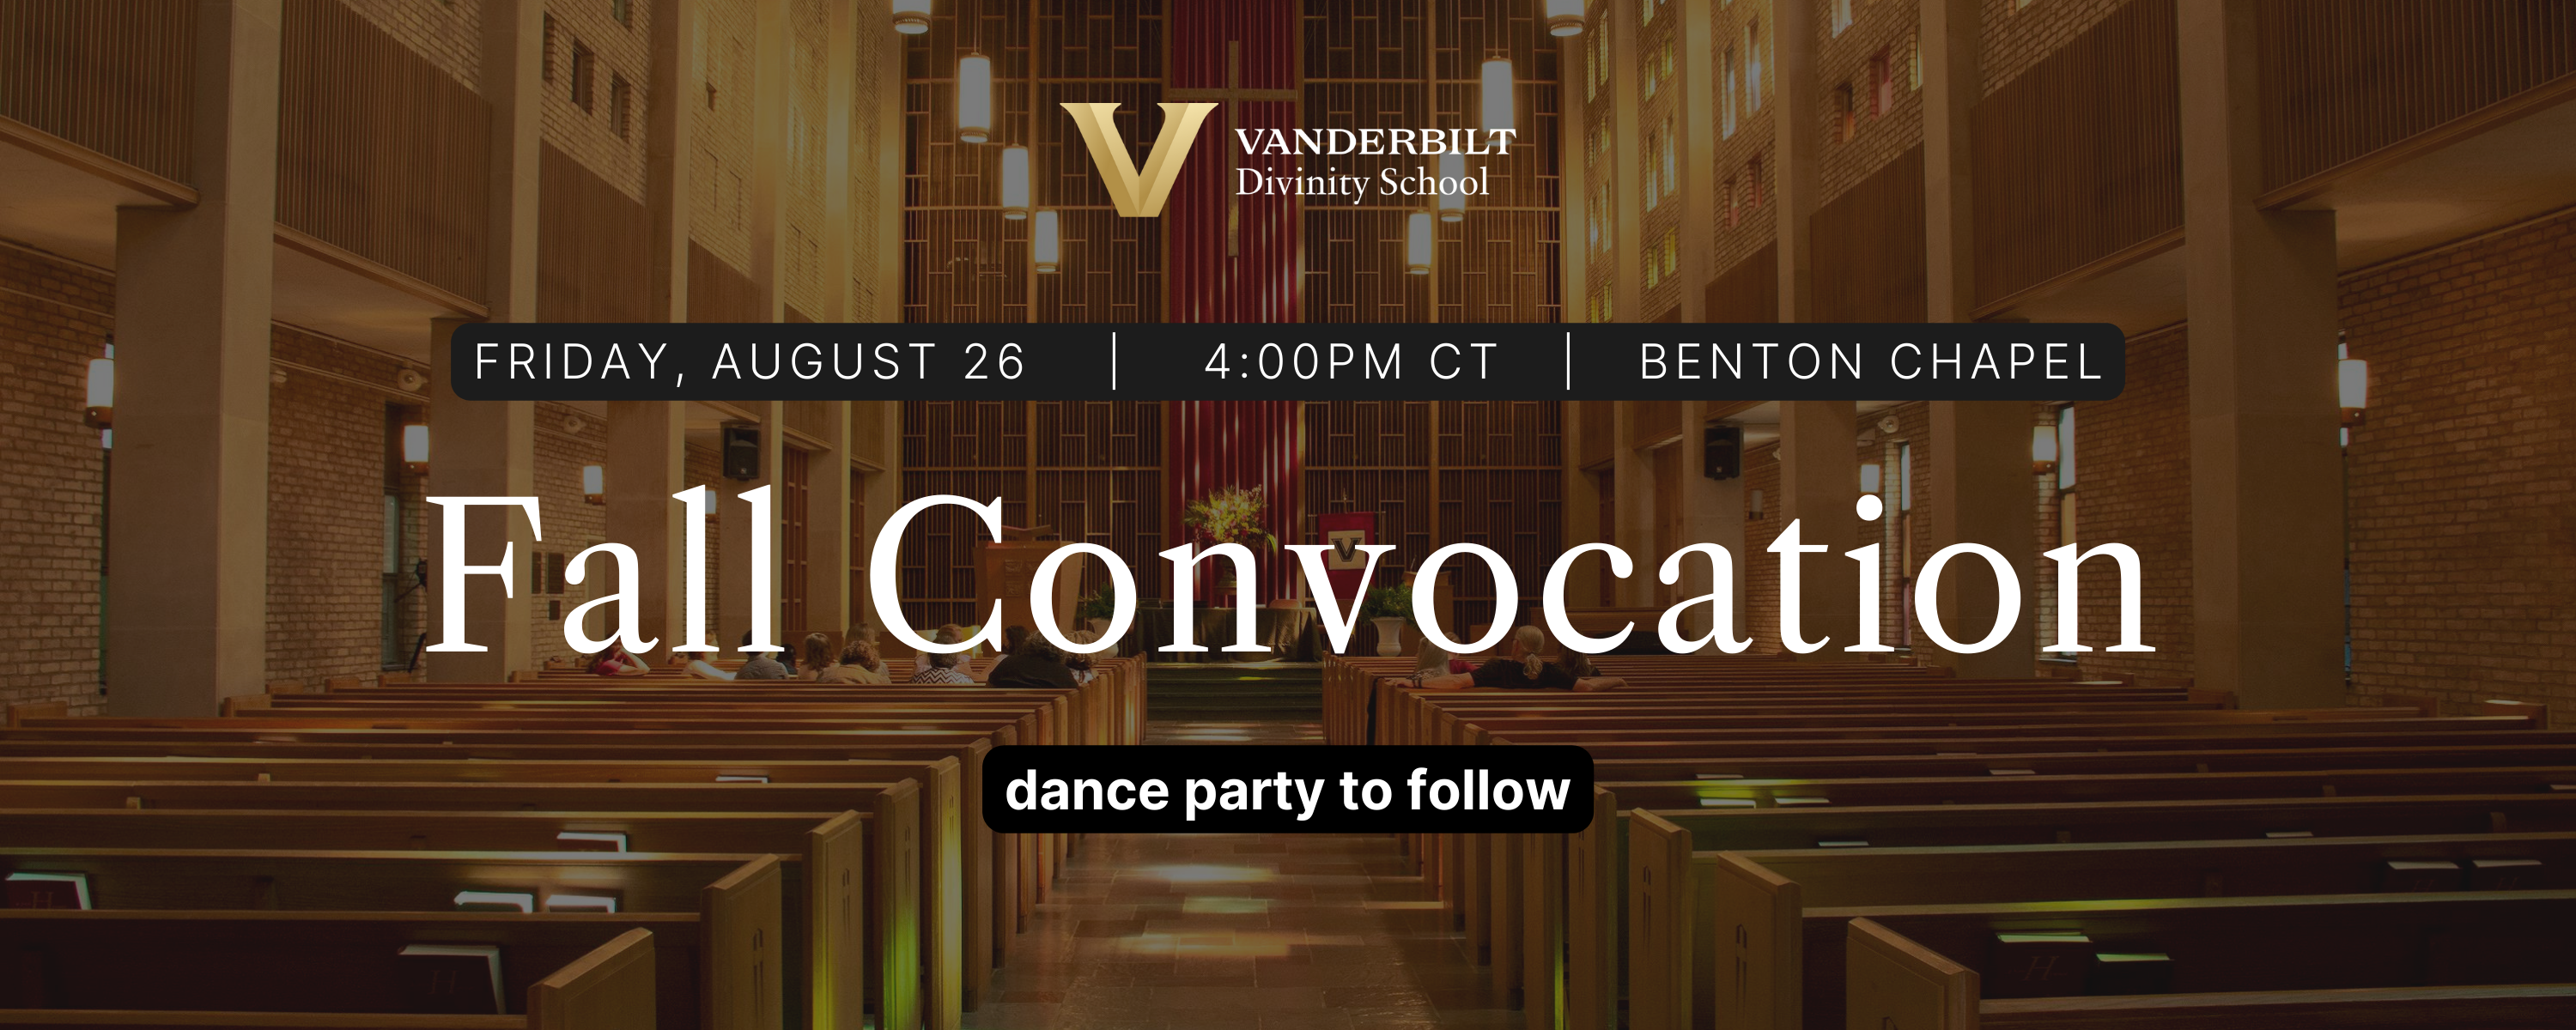 2022 Fall Convocation on Friday, August 26 at 4pm CT in Benton Chapel. Reception to follow.